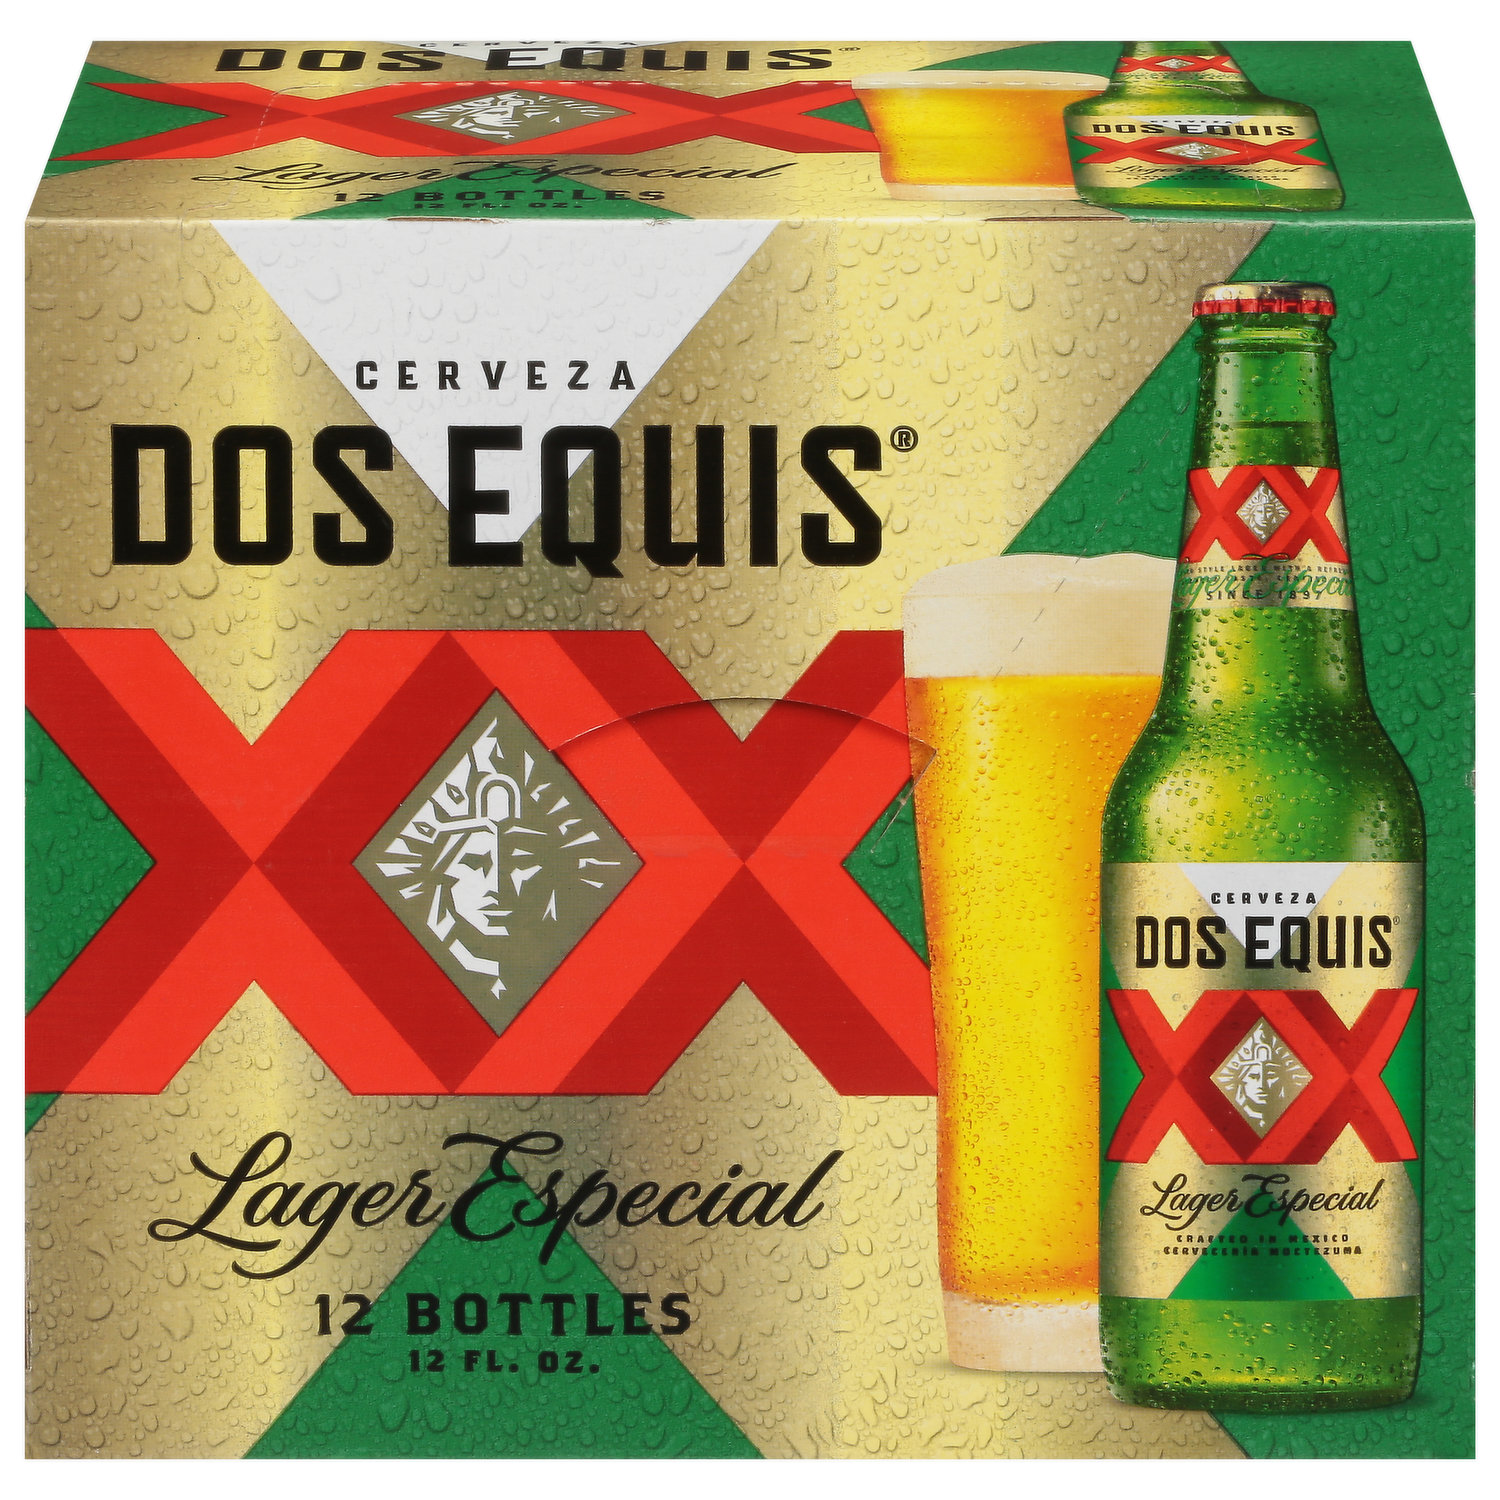 Dos Equis Beer Lager Especial